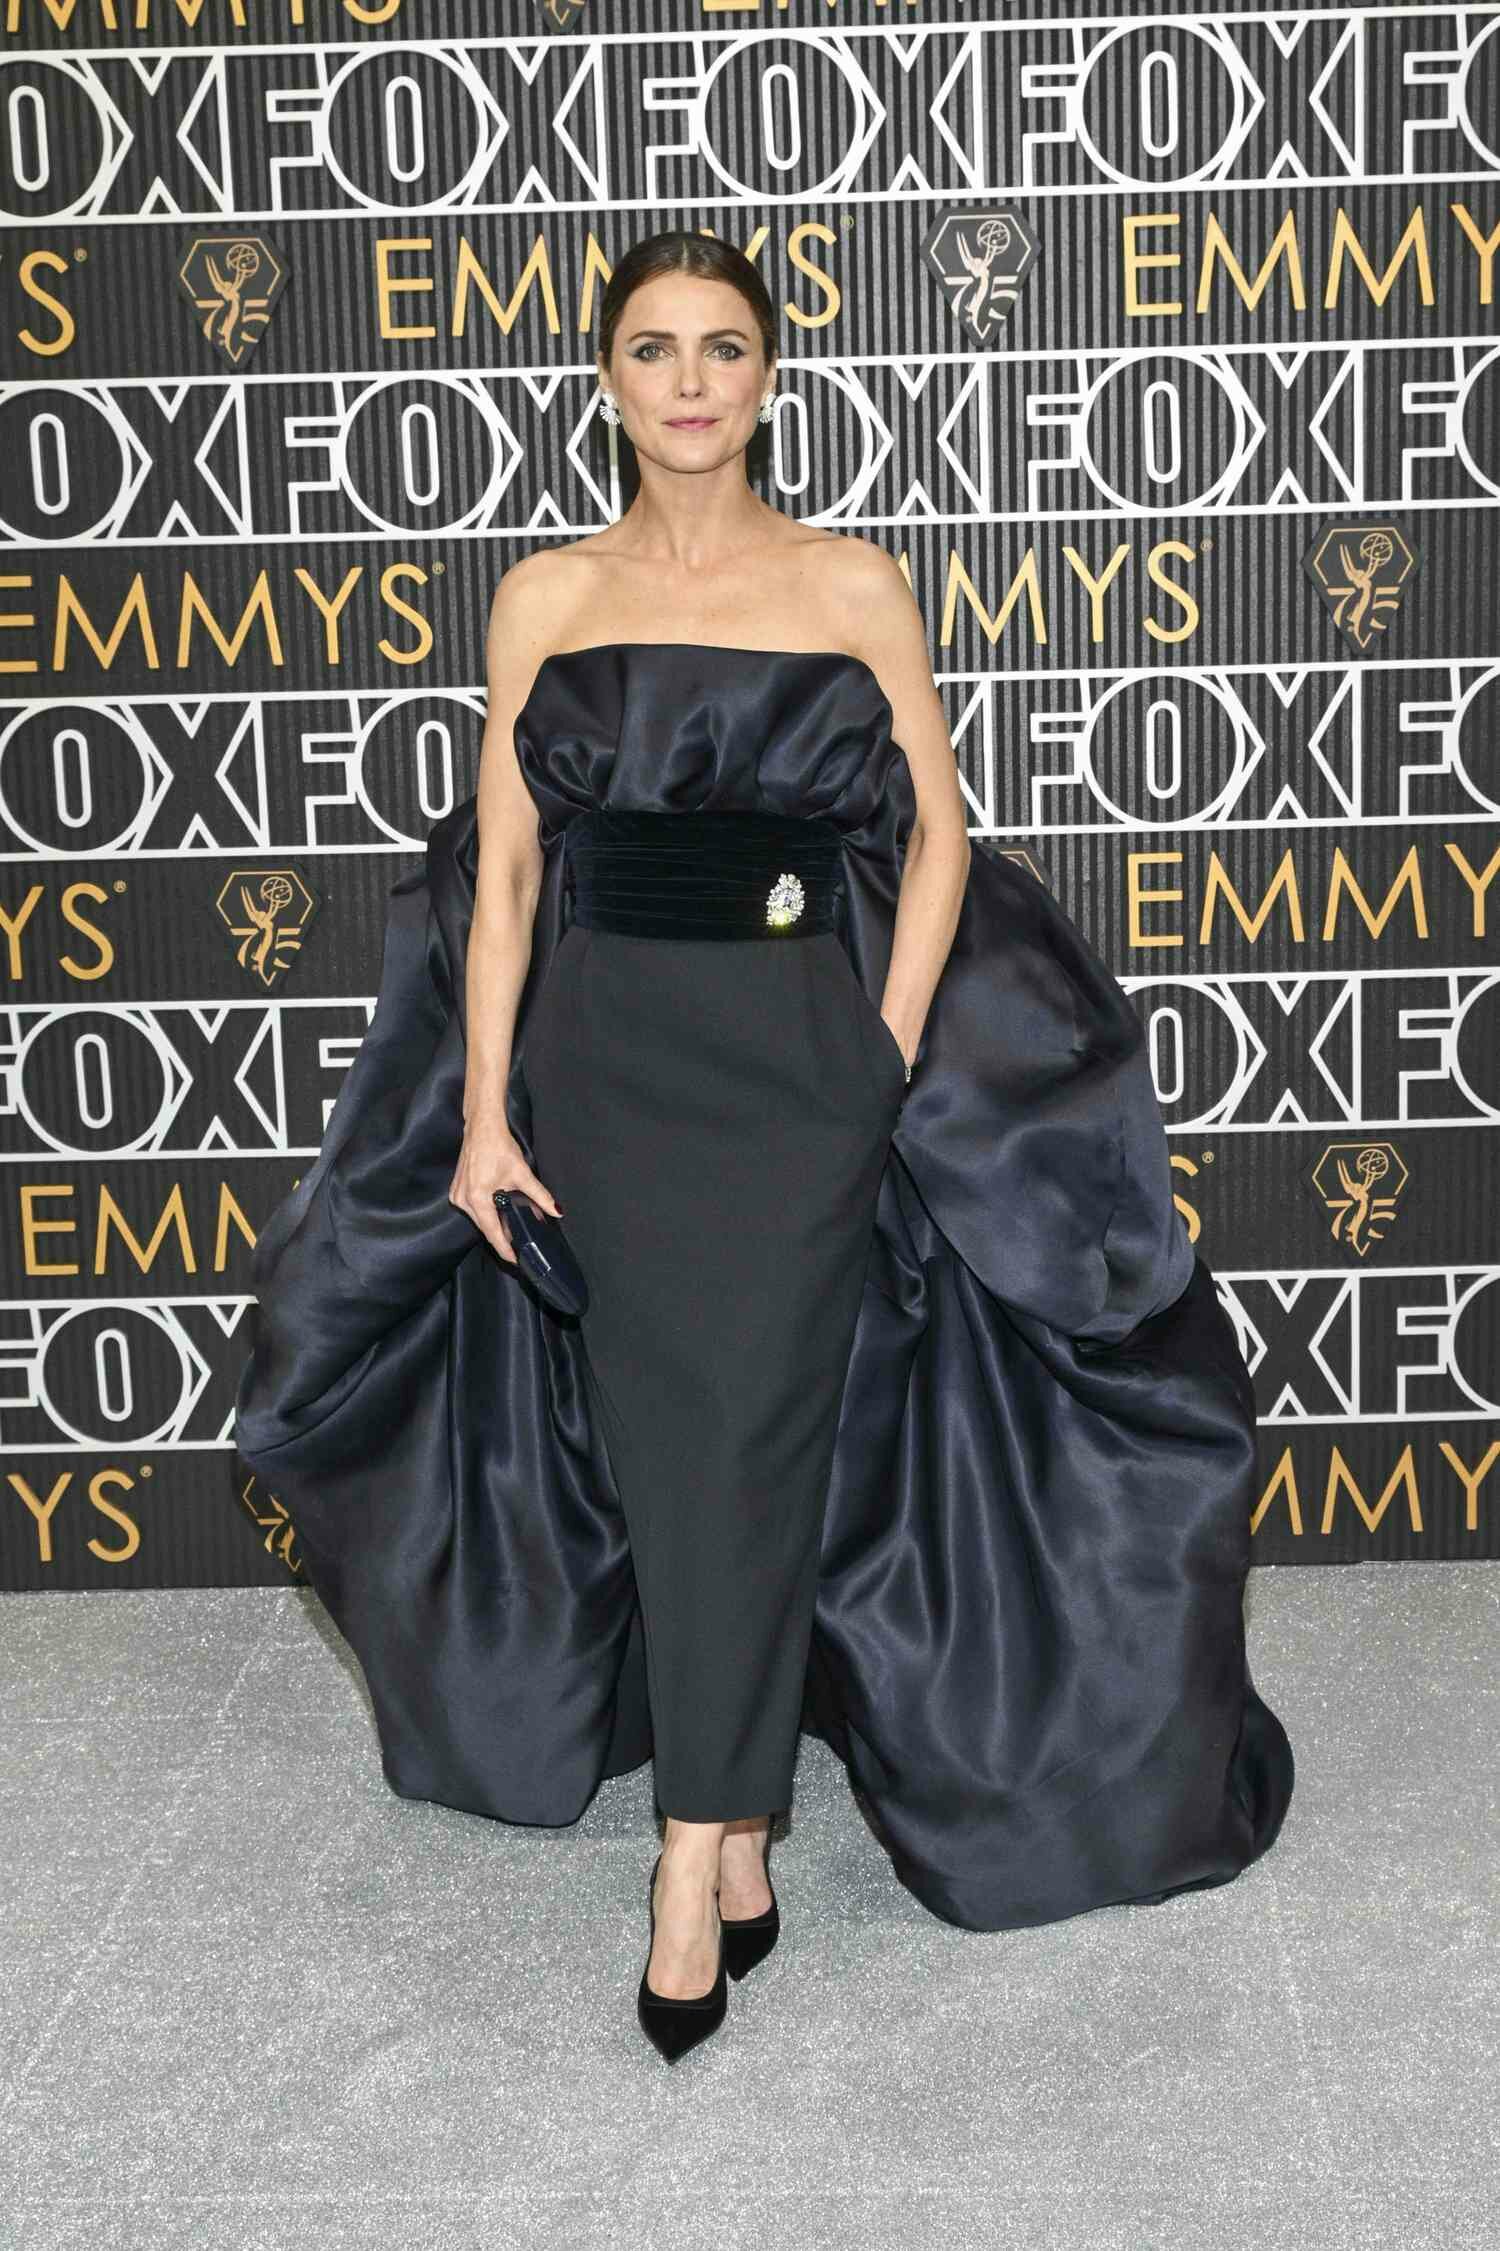  Keri Russell at the Emmy Awards